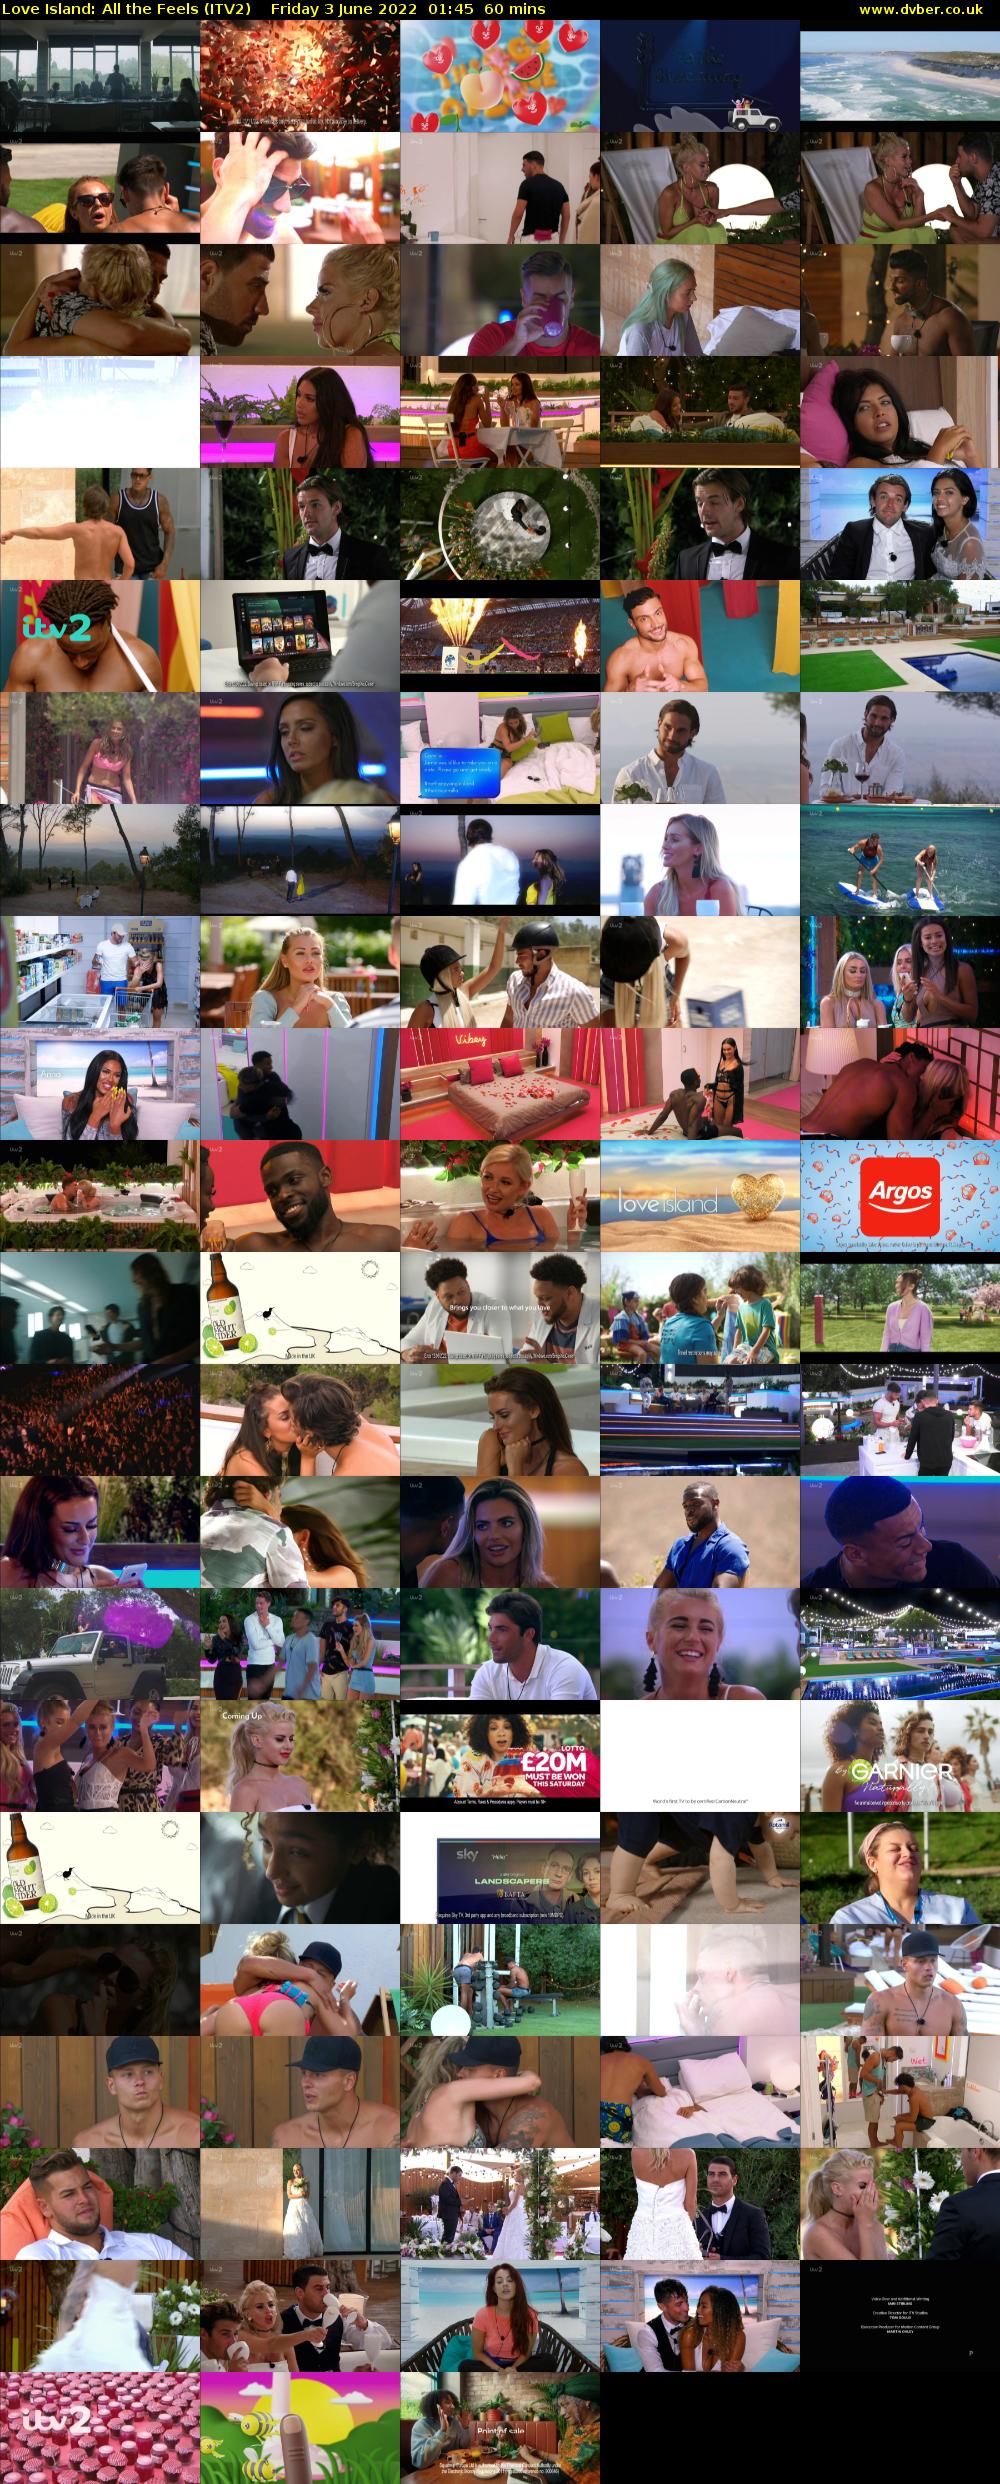 Love Island: All the Feels (ITV2) Friday 3 June 2022 01:45 - 02:45